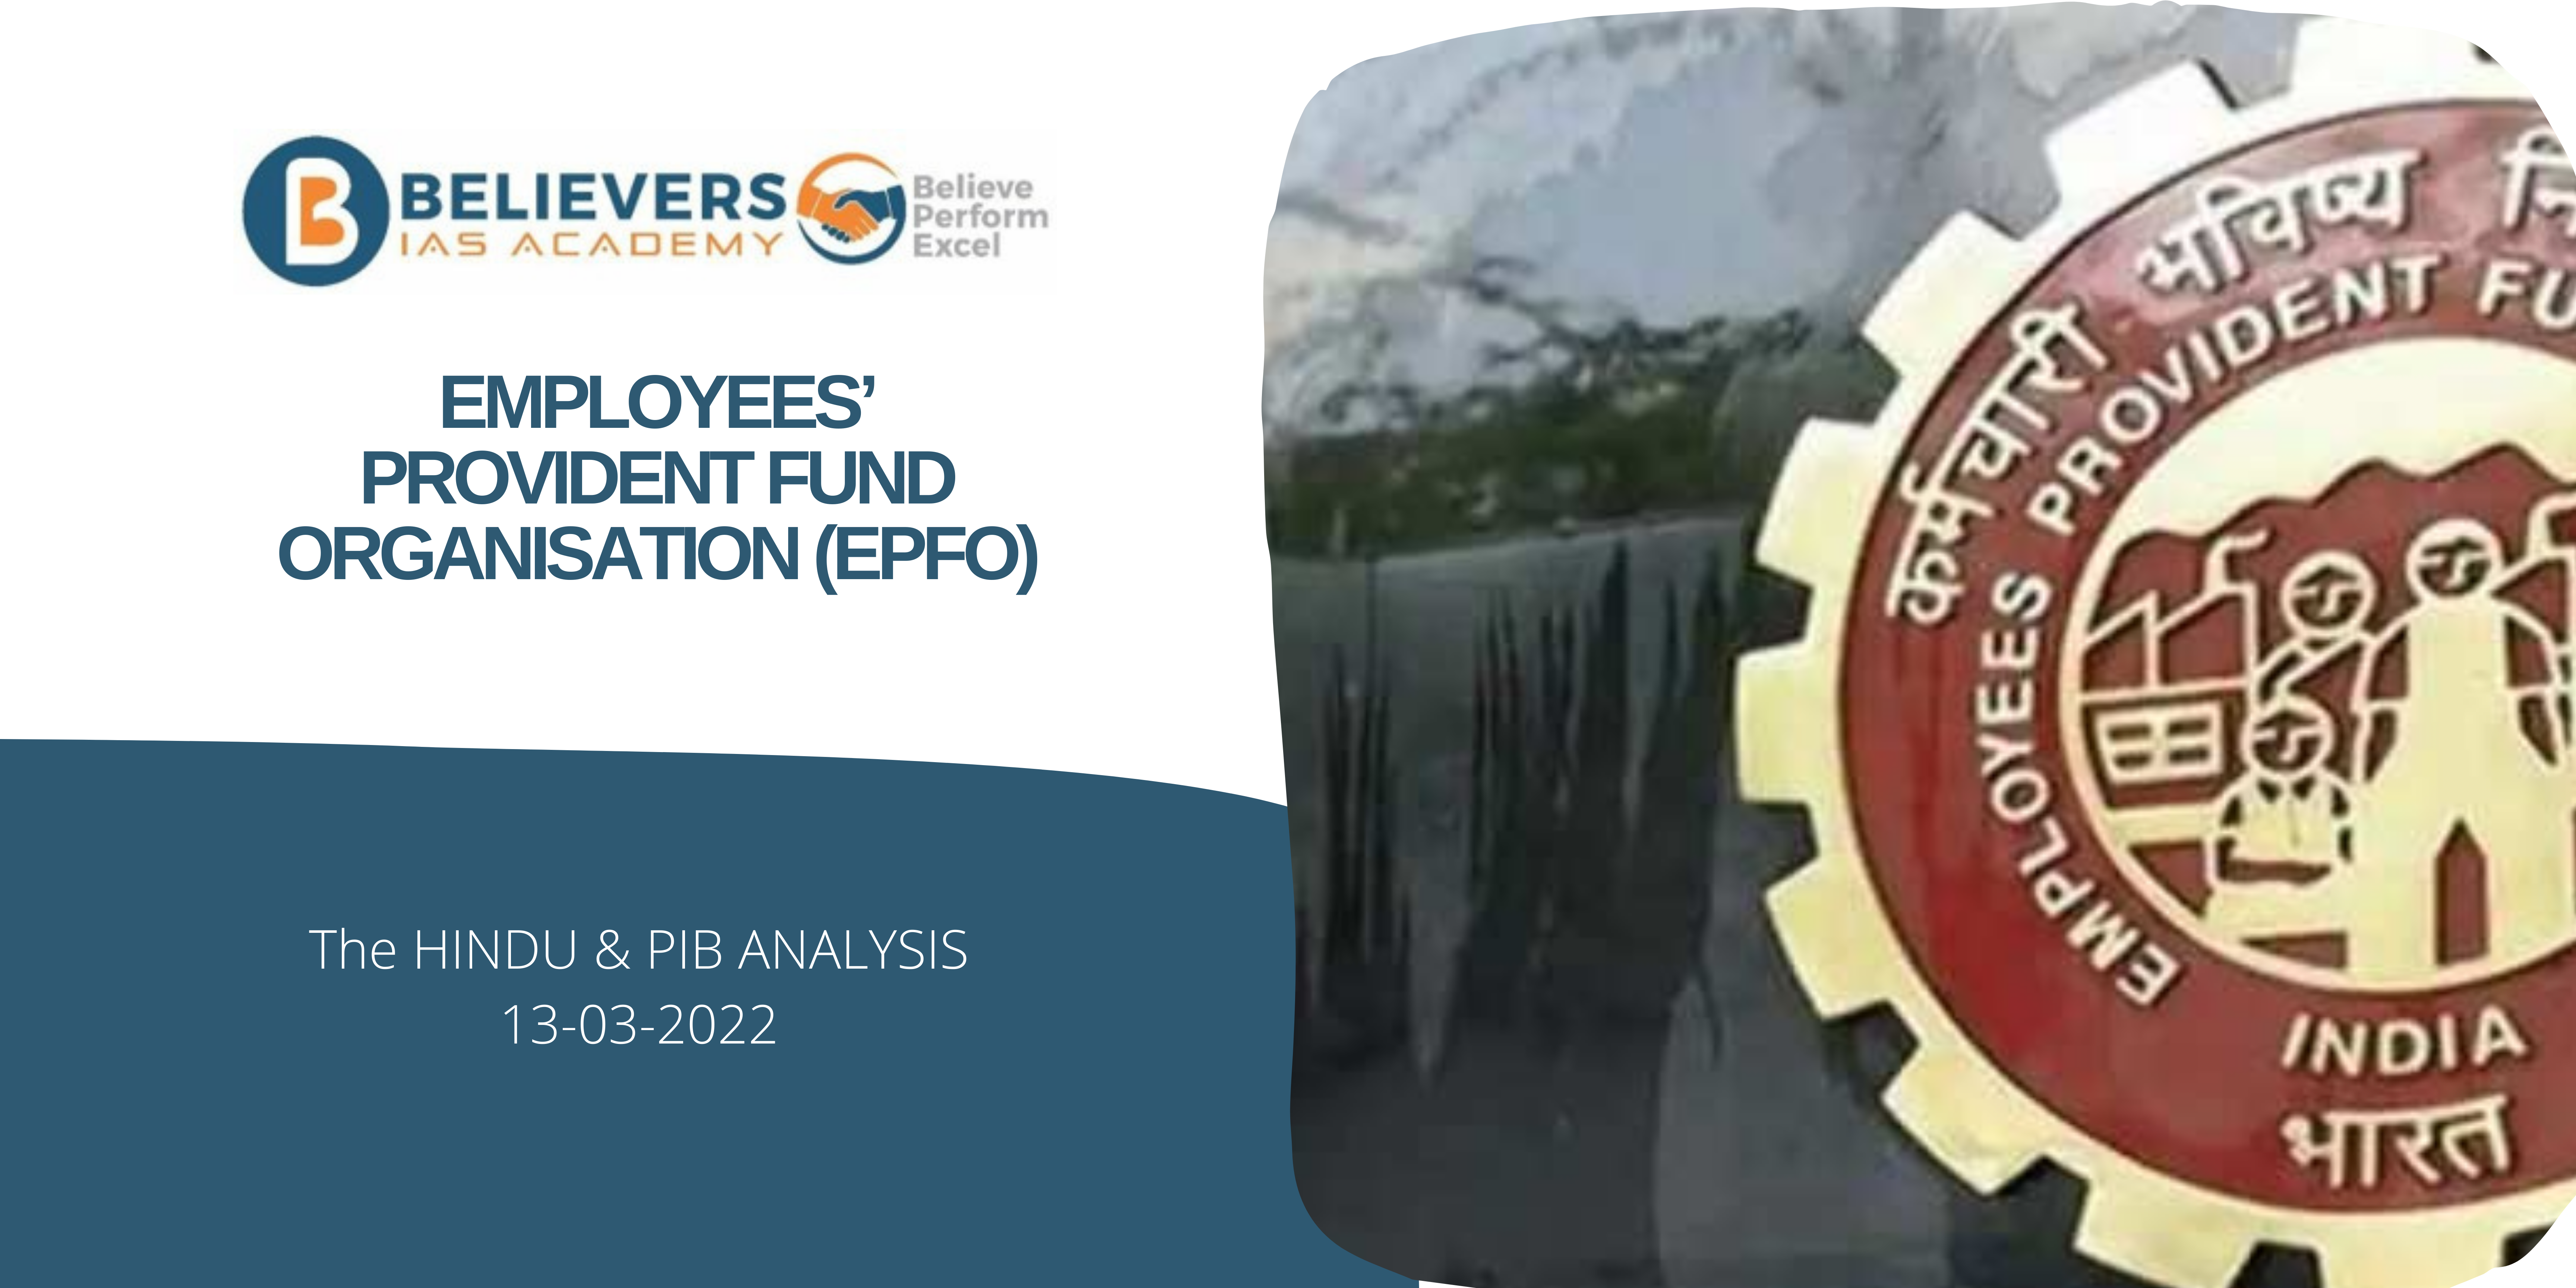 Civil services Current affairs - Employee' Provident Fund Organisation